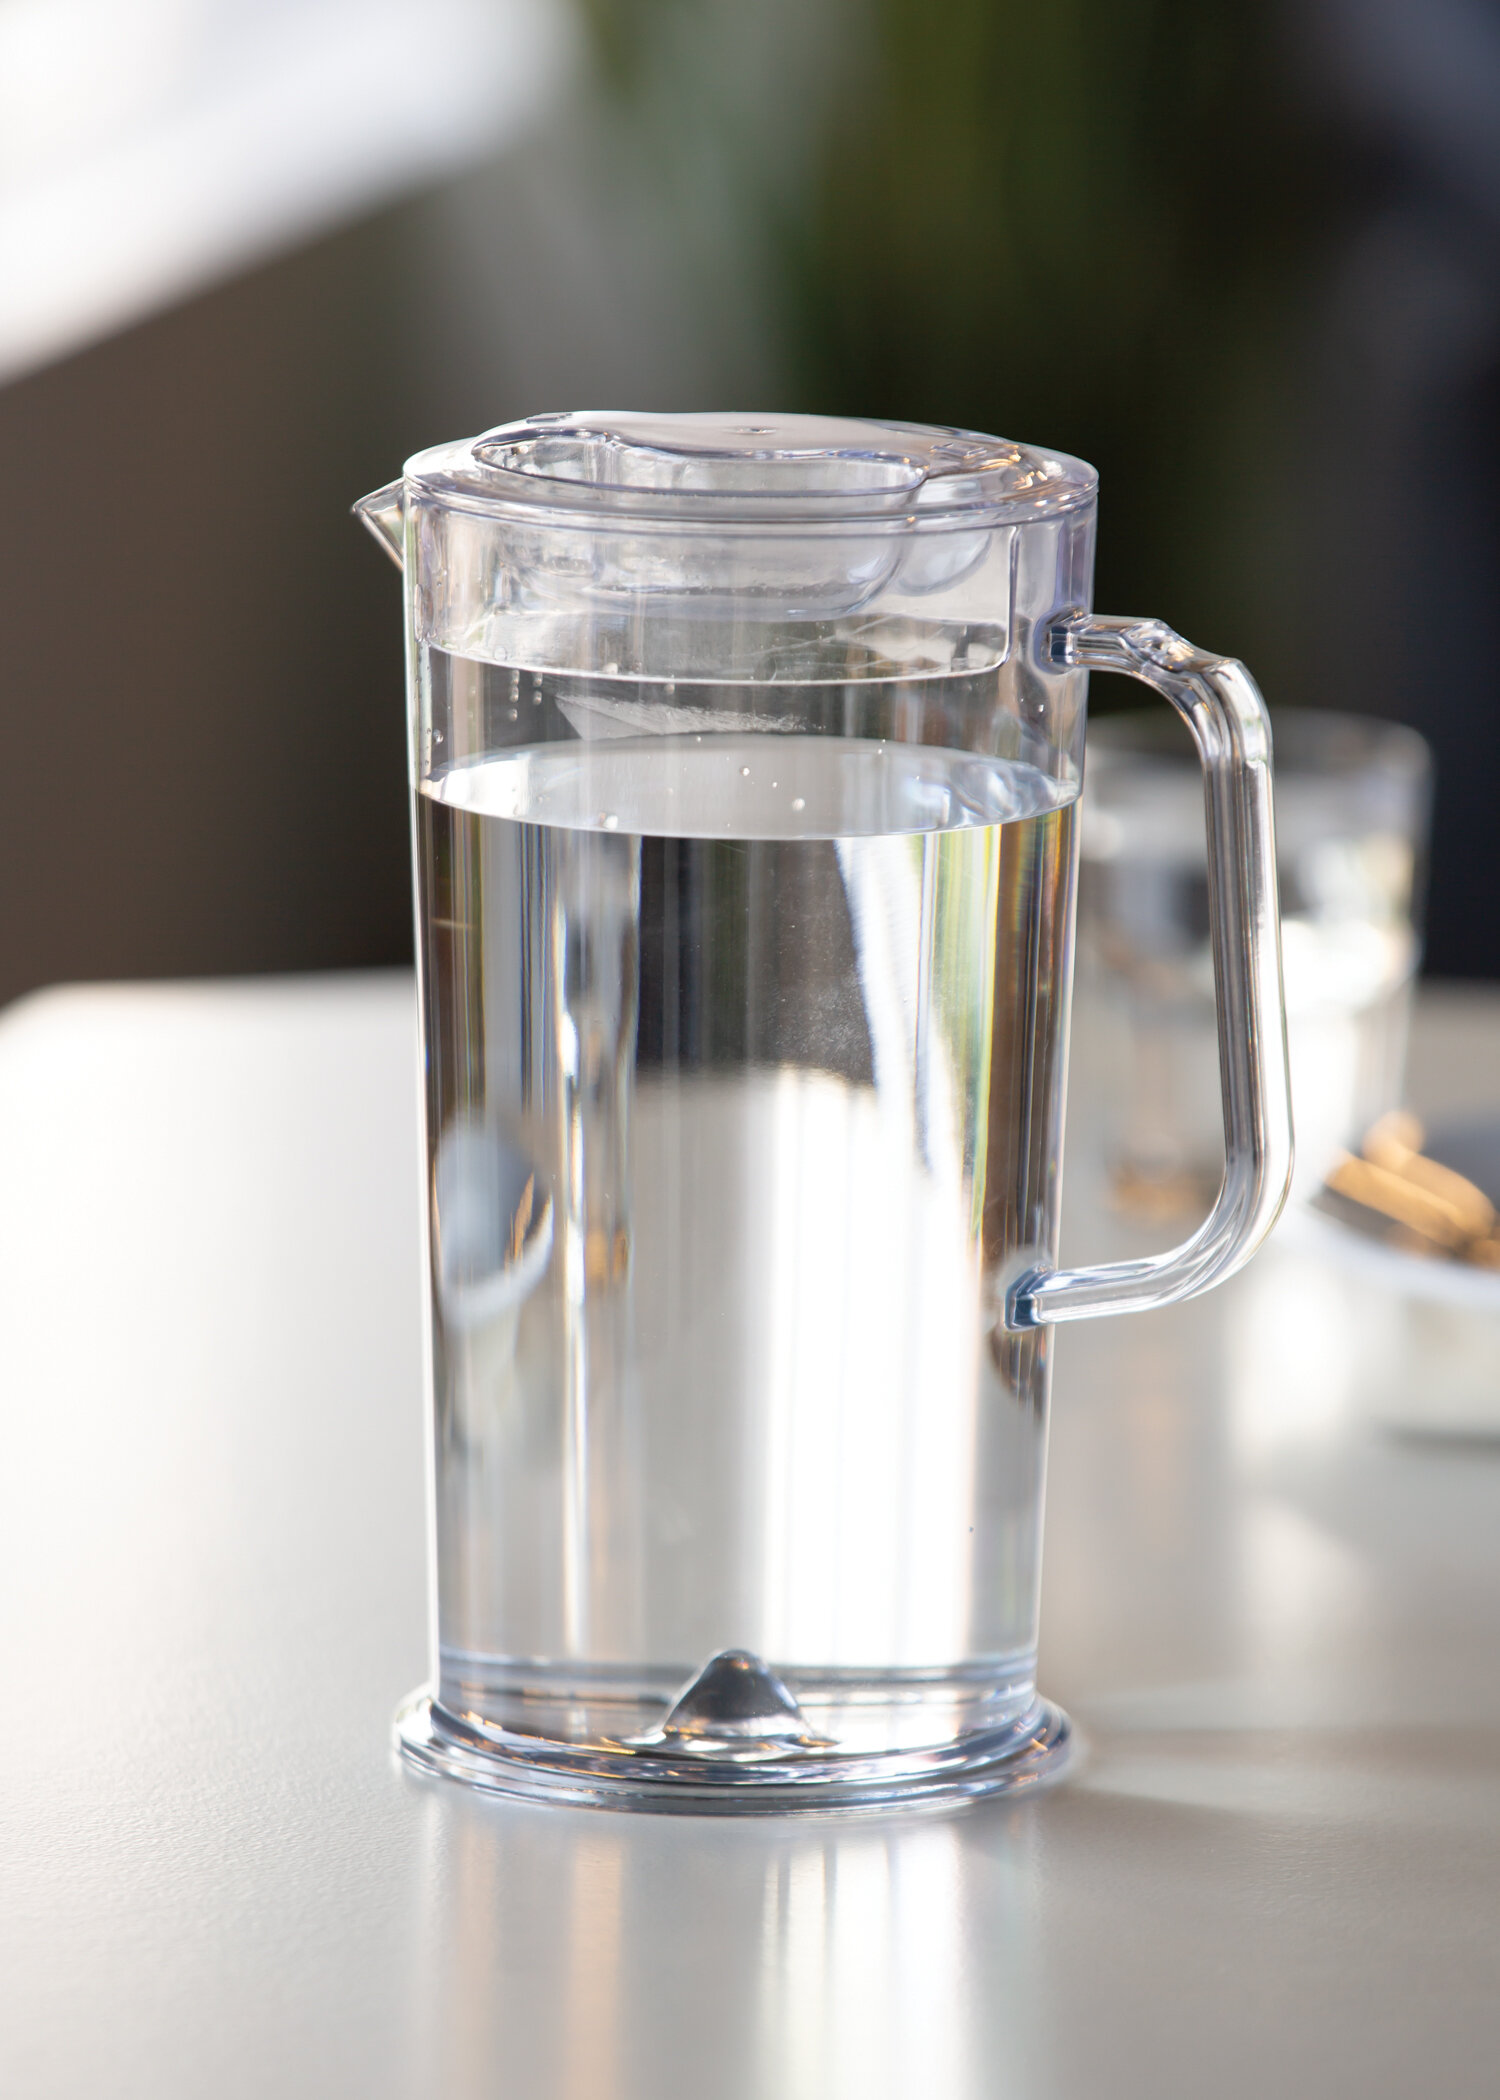 Fridge Door Water Pitcher with Lid Perfect for Making Tea, Juice and Cold Drink, 71 oz Water Jug Made of Clear Pet, No Smell Clear Fiber Glass Carafe